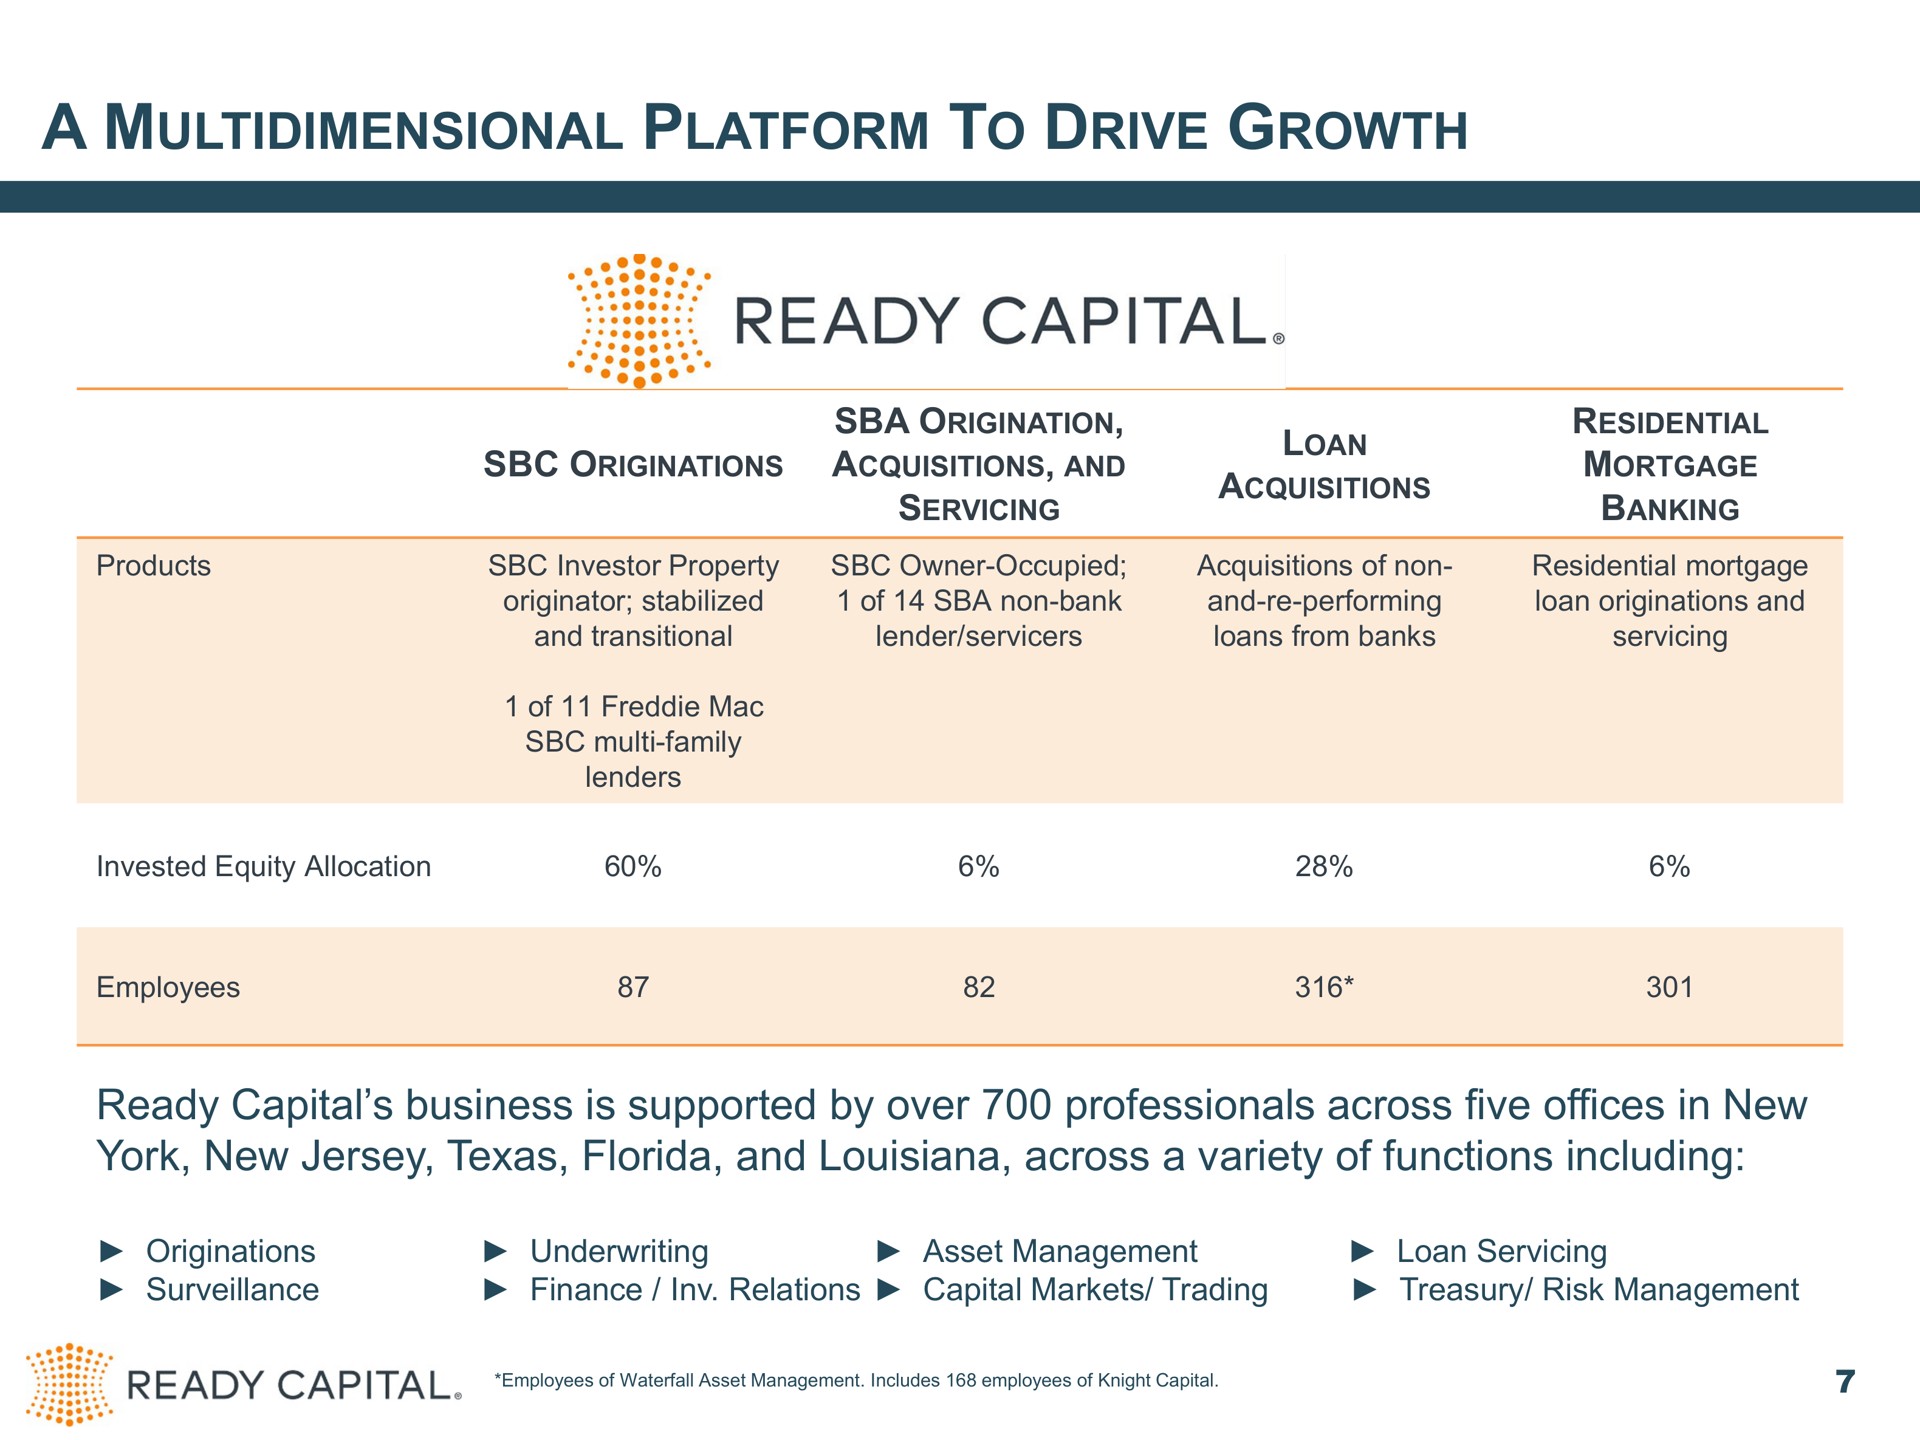 a multidimensional platform to drive growth ready capital business is supported by over professionals across five offices in new york new jersey and across a variety of functions including originations surveillance underwriting finance relations capital markets trading treasury risk management asset management loan servicing | Ready Capital